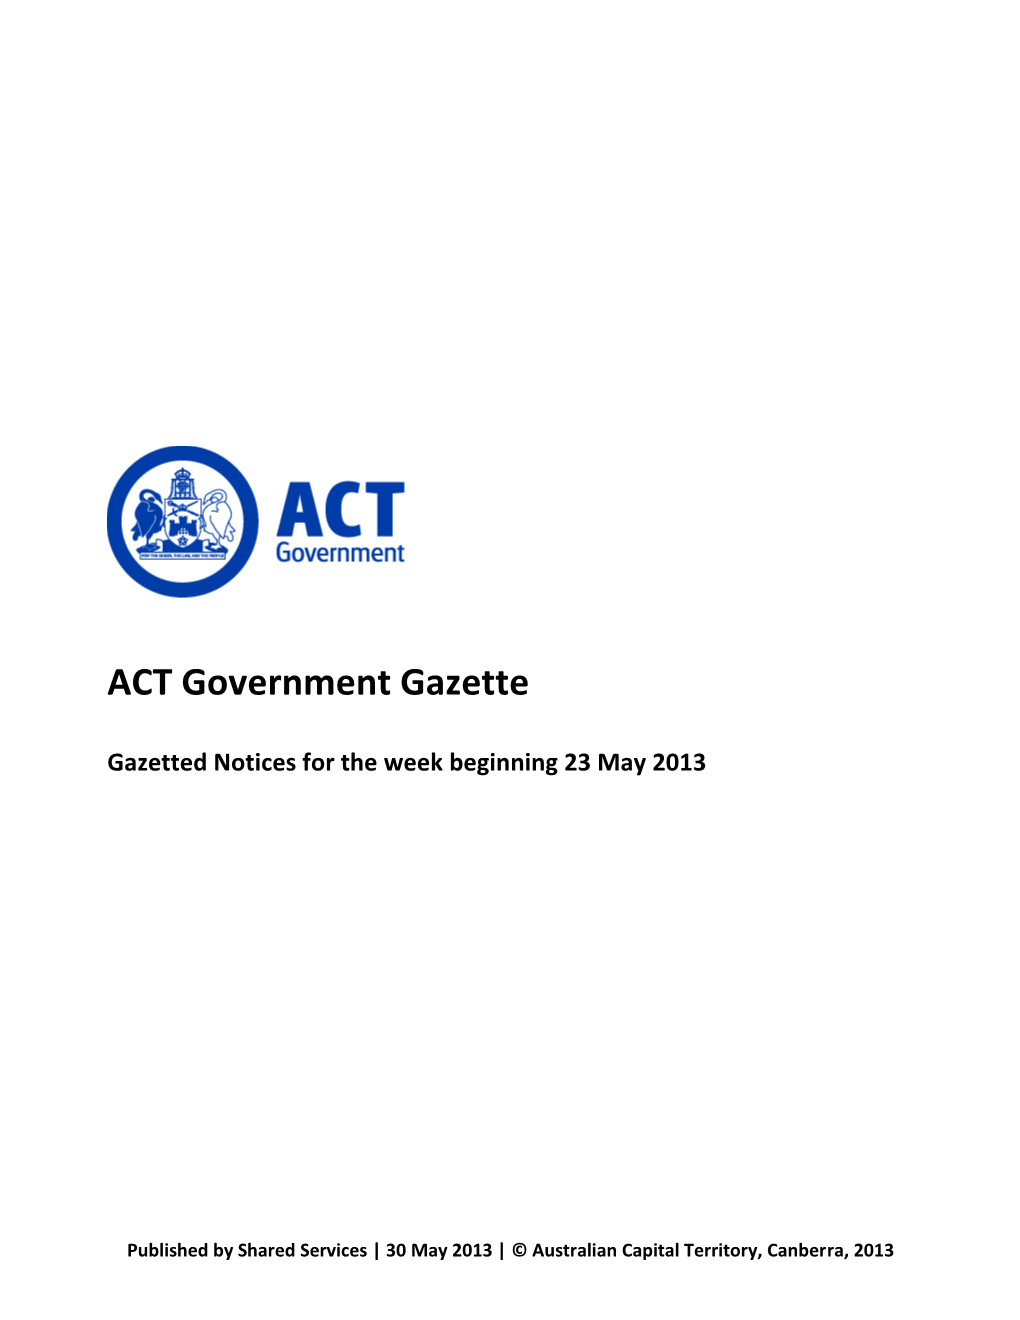 ACT Government Gazette 30 May 2013